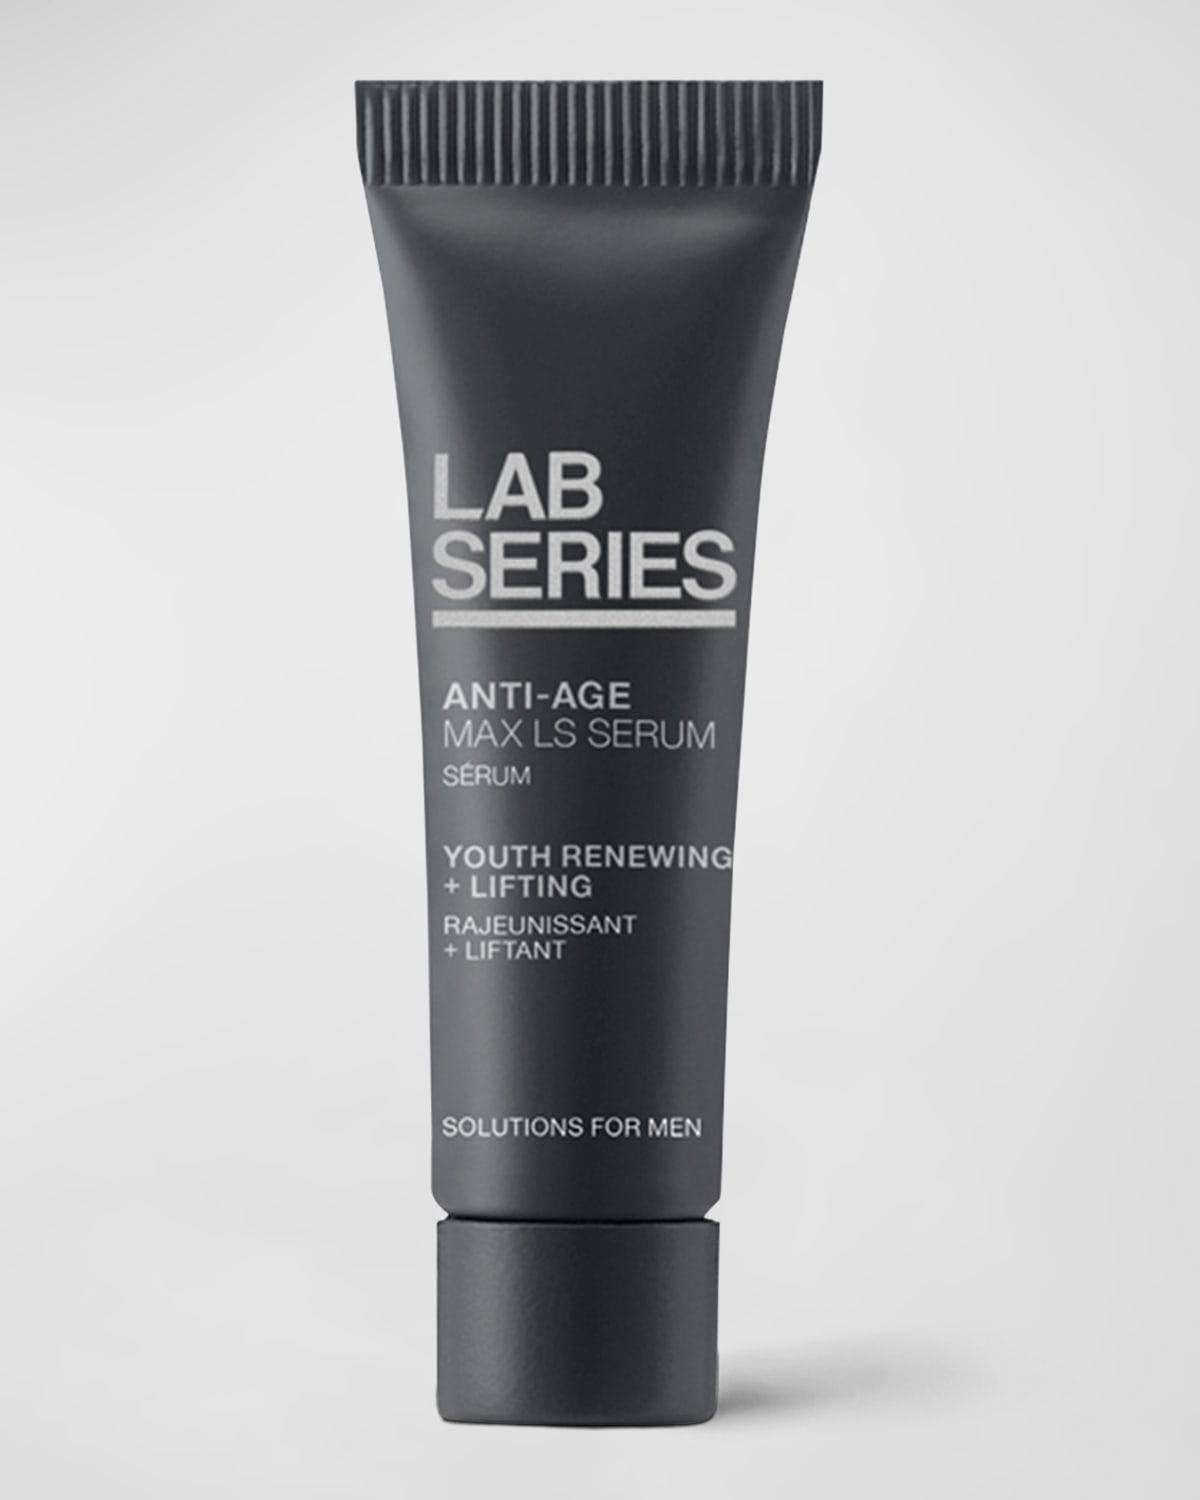 Anti-Age Max LS Serum, 0.24 oz. - Yours with any $65 Lab Series for Men Purchase